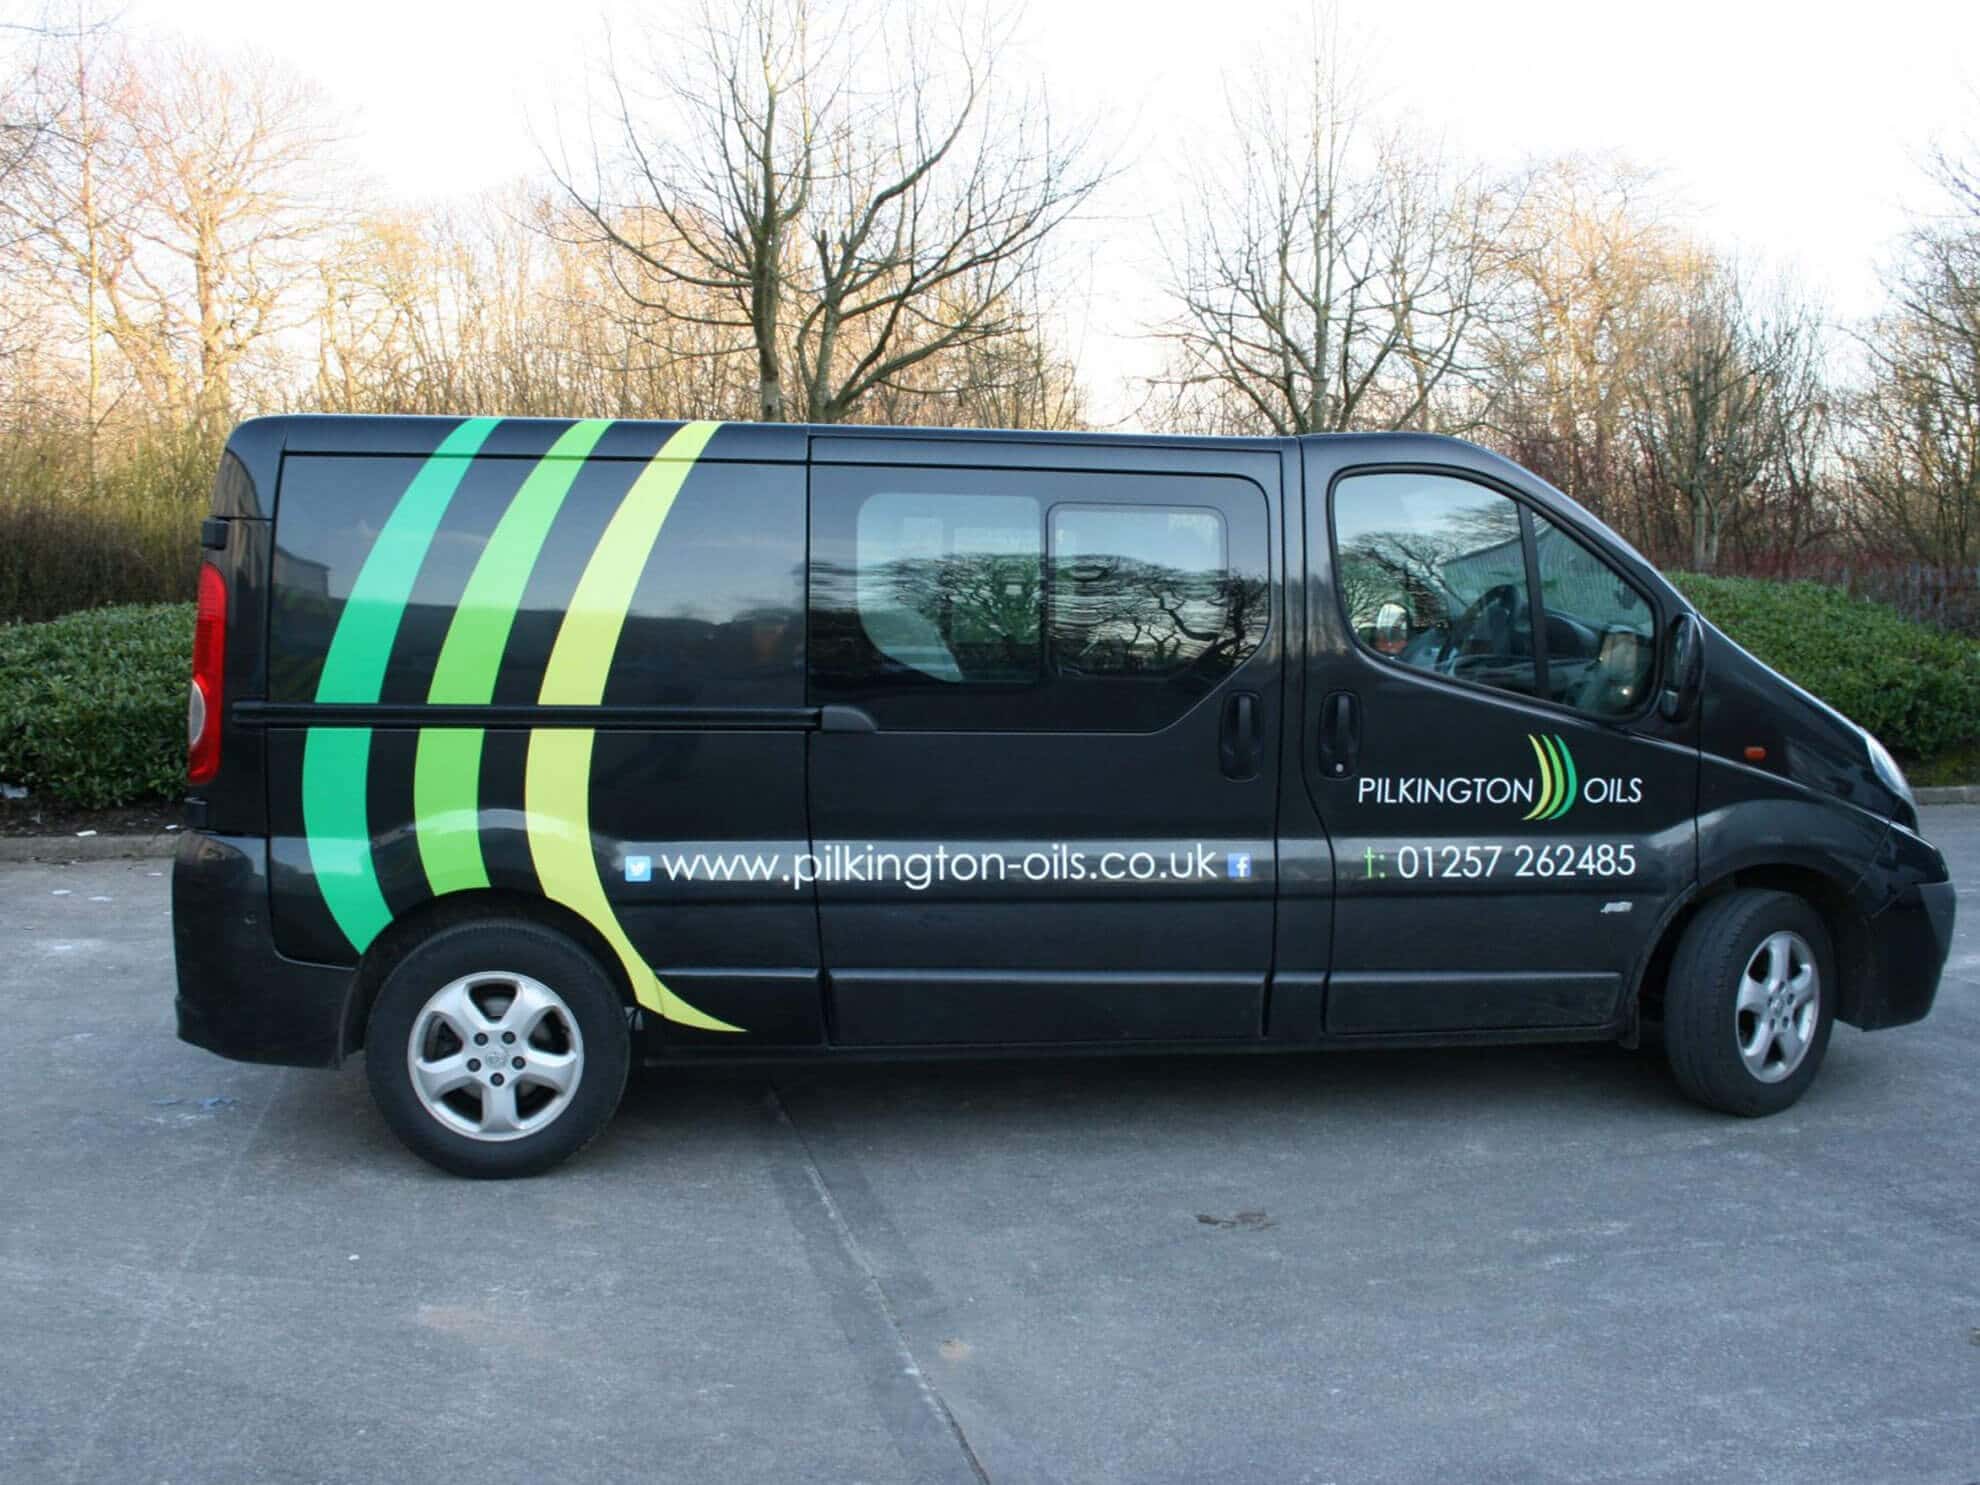 Pilkington Oils cut vinyl vehicle graphics and wrapping